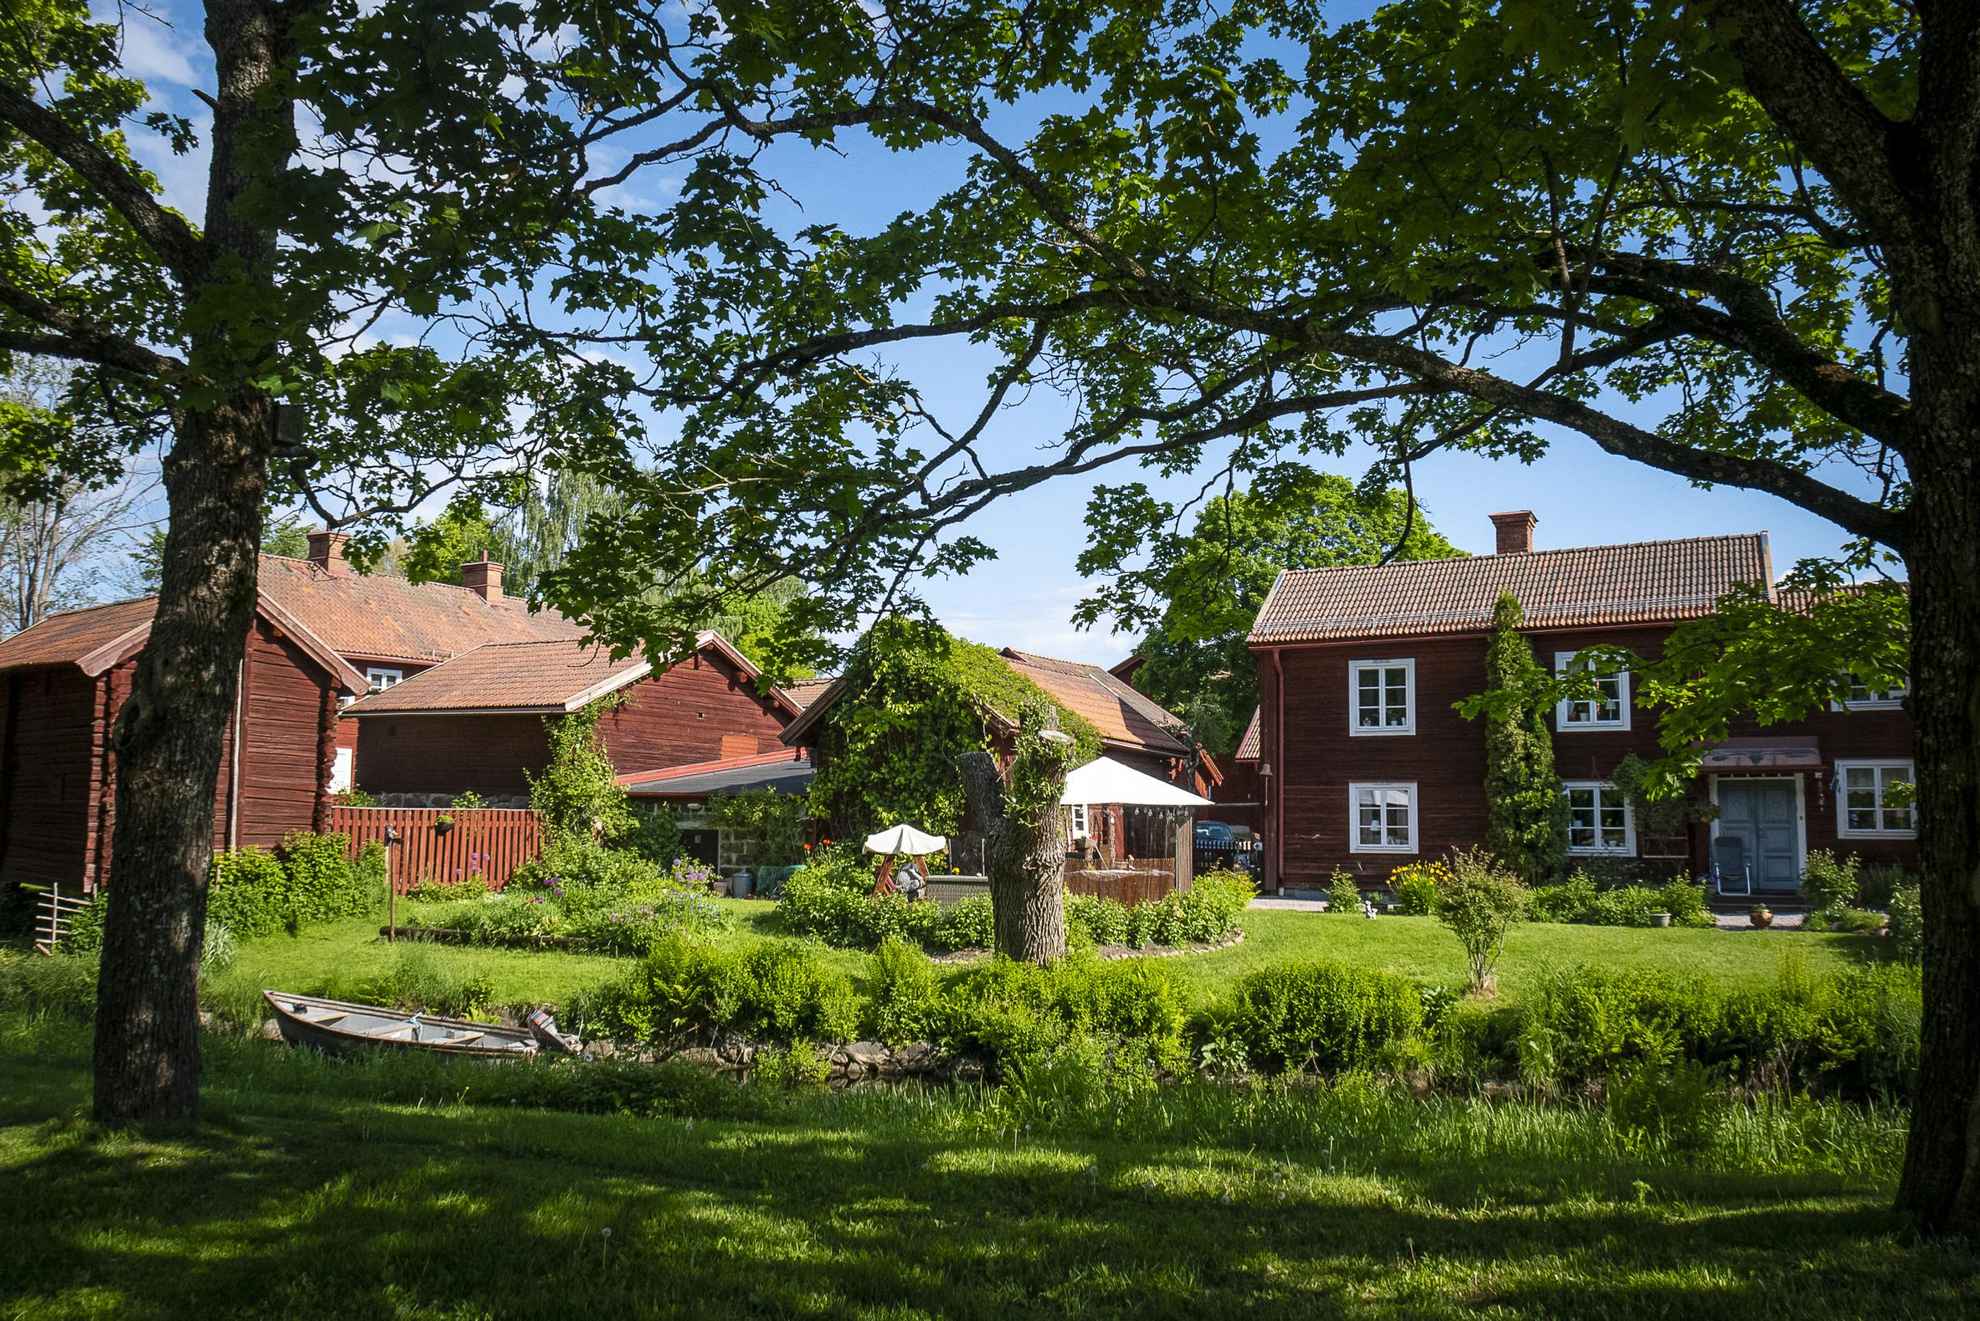 Several traditional houses painted with the famous paint Falu Rödfärg surrounded by greenery.